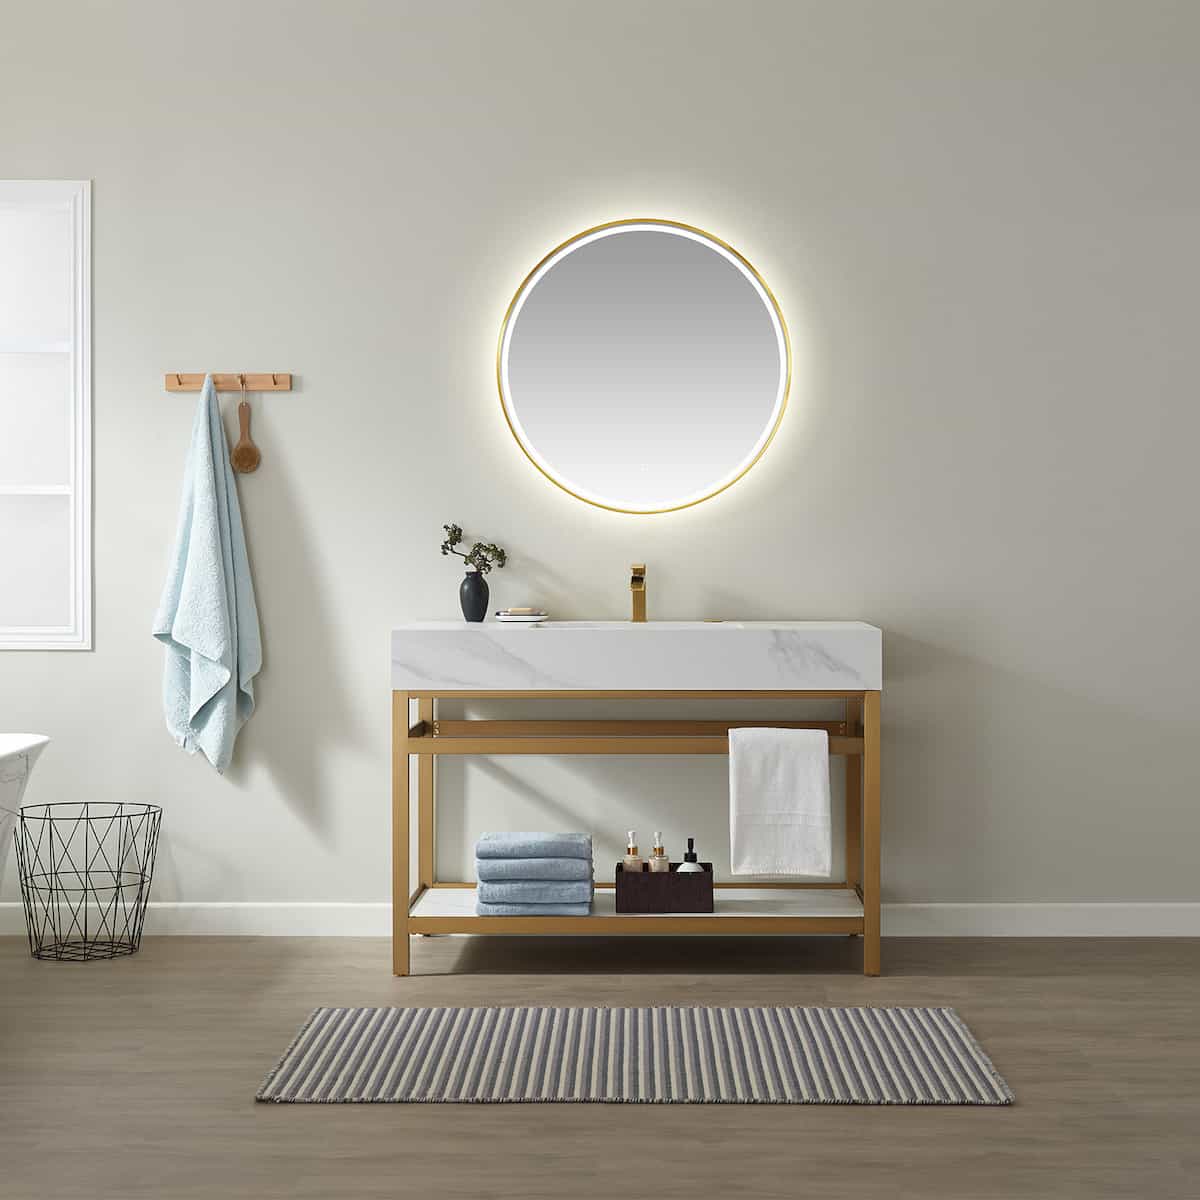 Vinnova Bilbao 48 Inch Freestanding Single Vanity with Brushed-Gold Stainless Steel Bracket Match with Snow Mountain-White Stone Countertop With LED Mirror in Bathroom 701148-BG-SMB